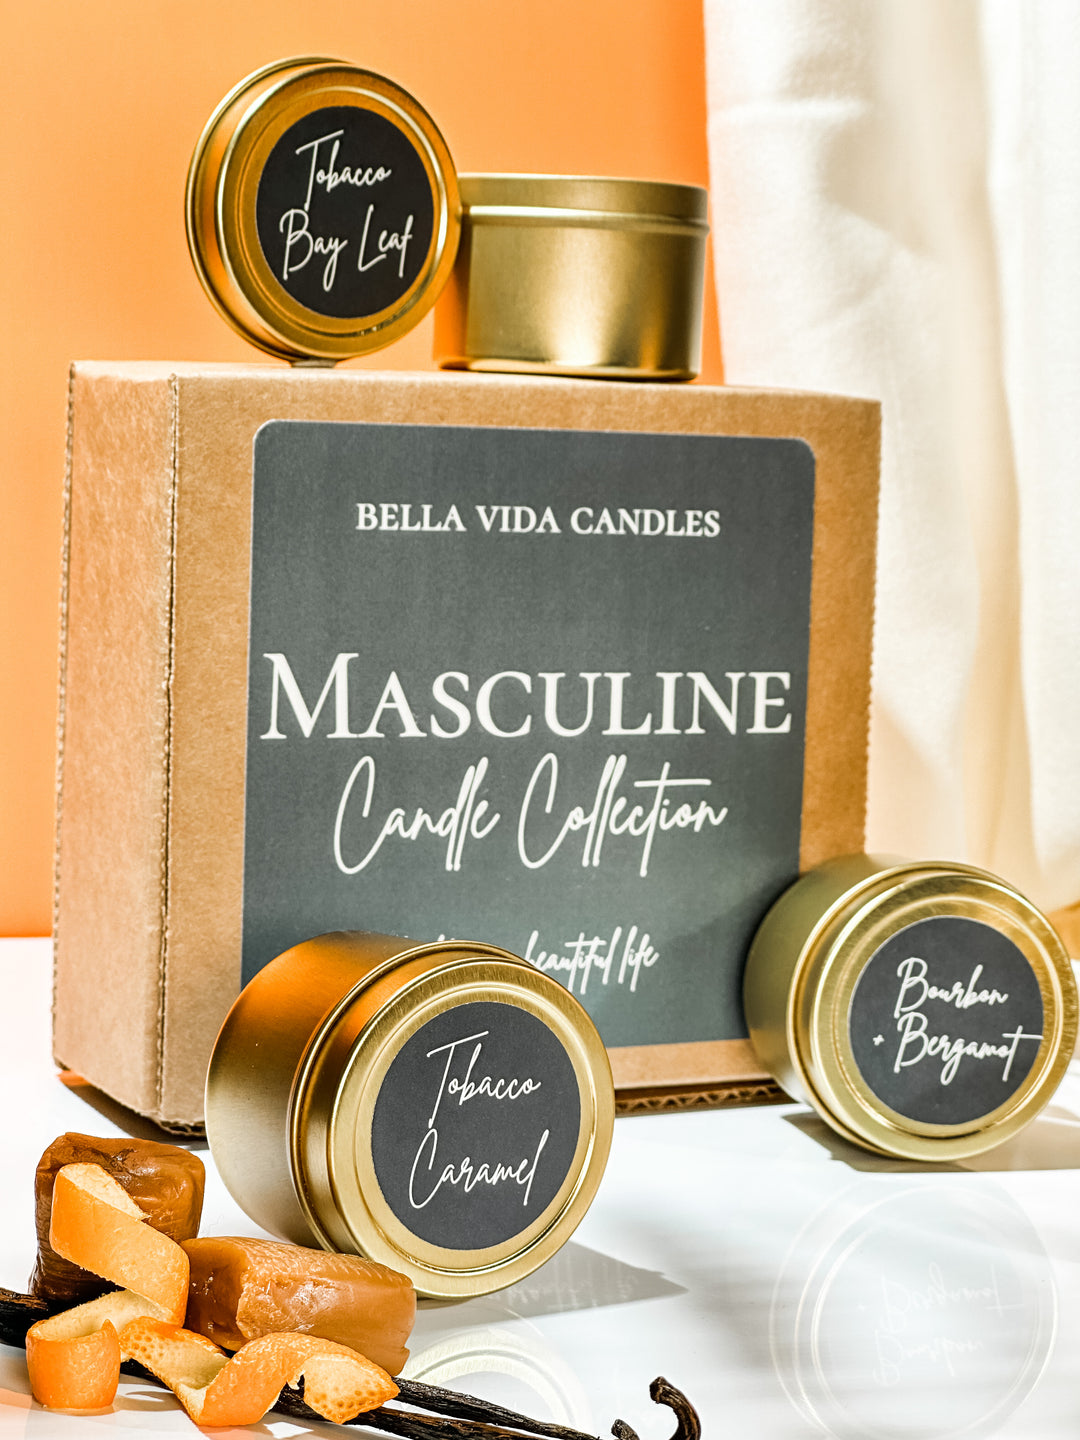 Masculine Soy Candle Sniffer Box